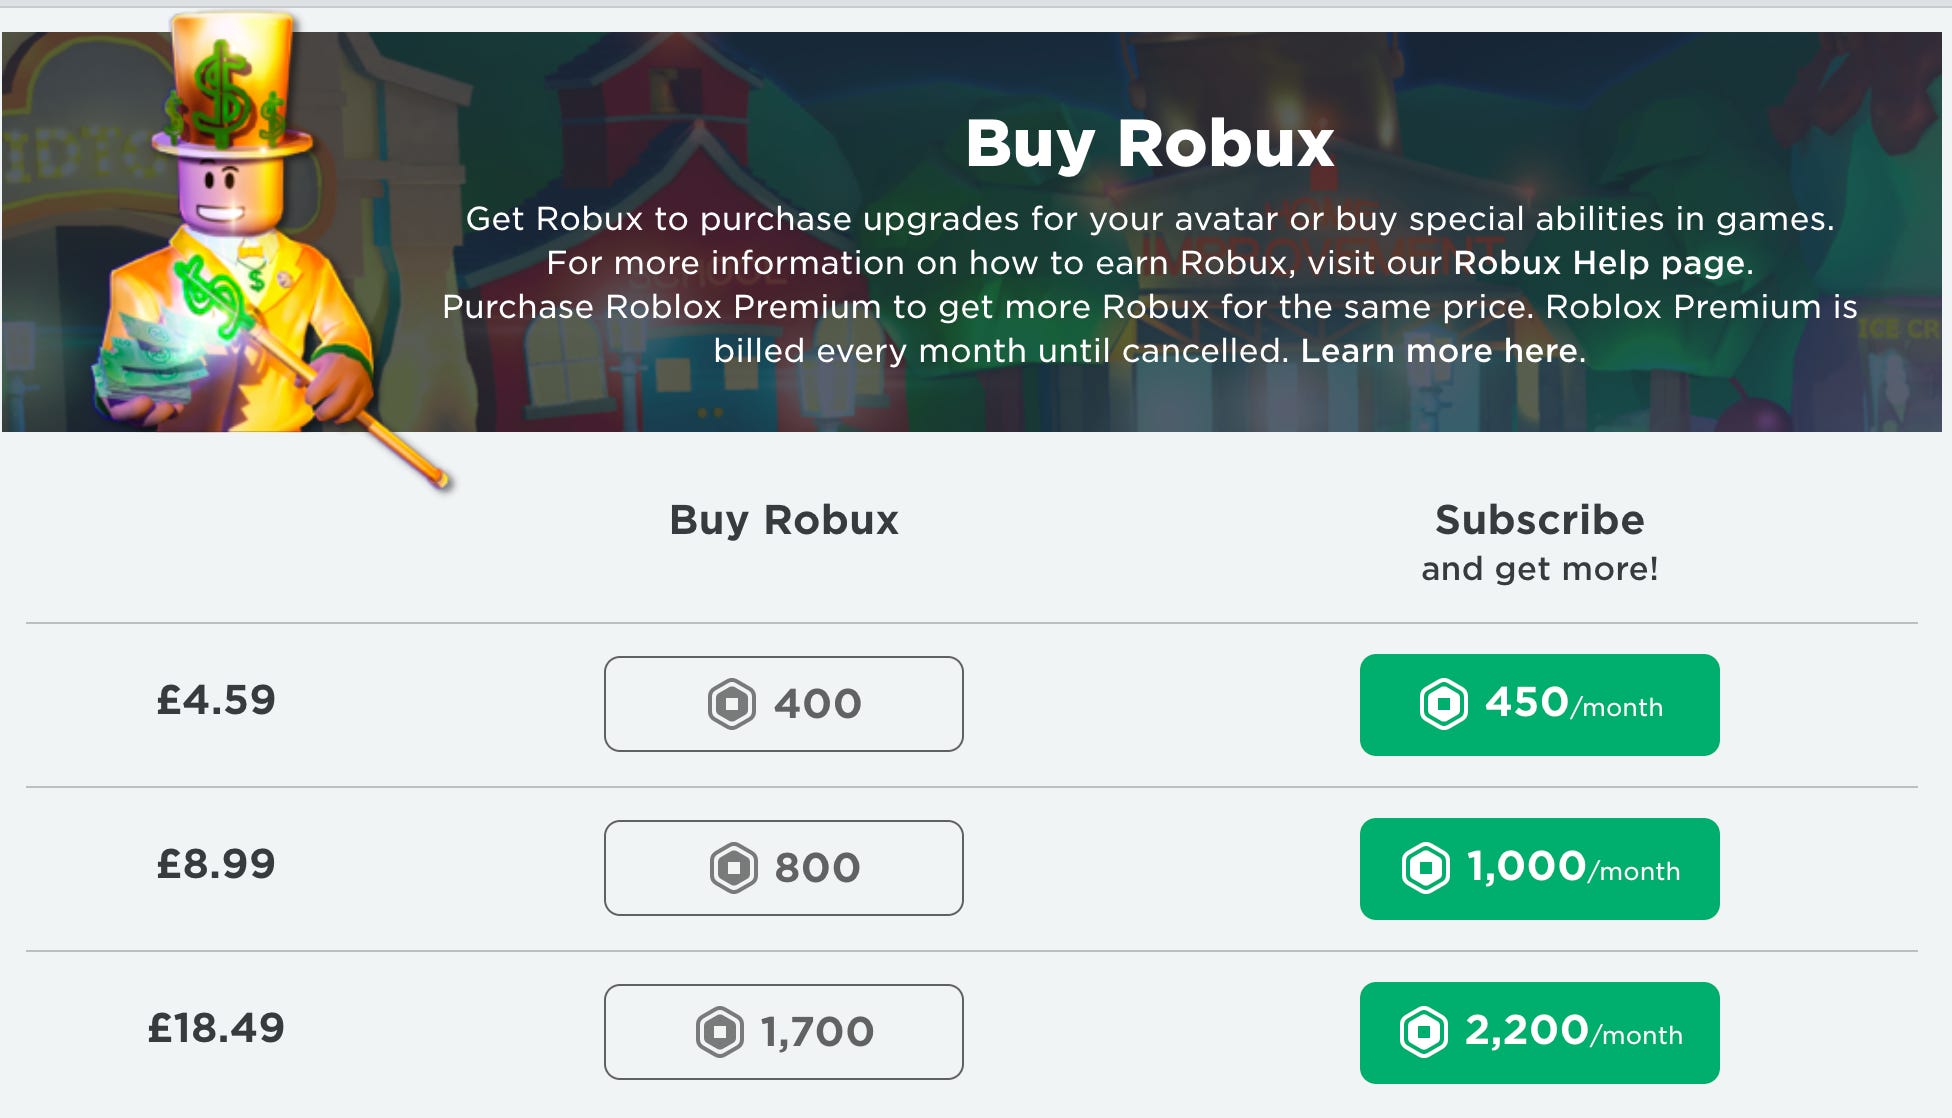 can you buy roblox premium with robux